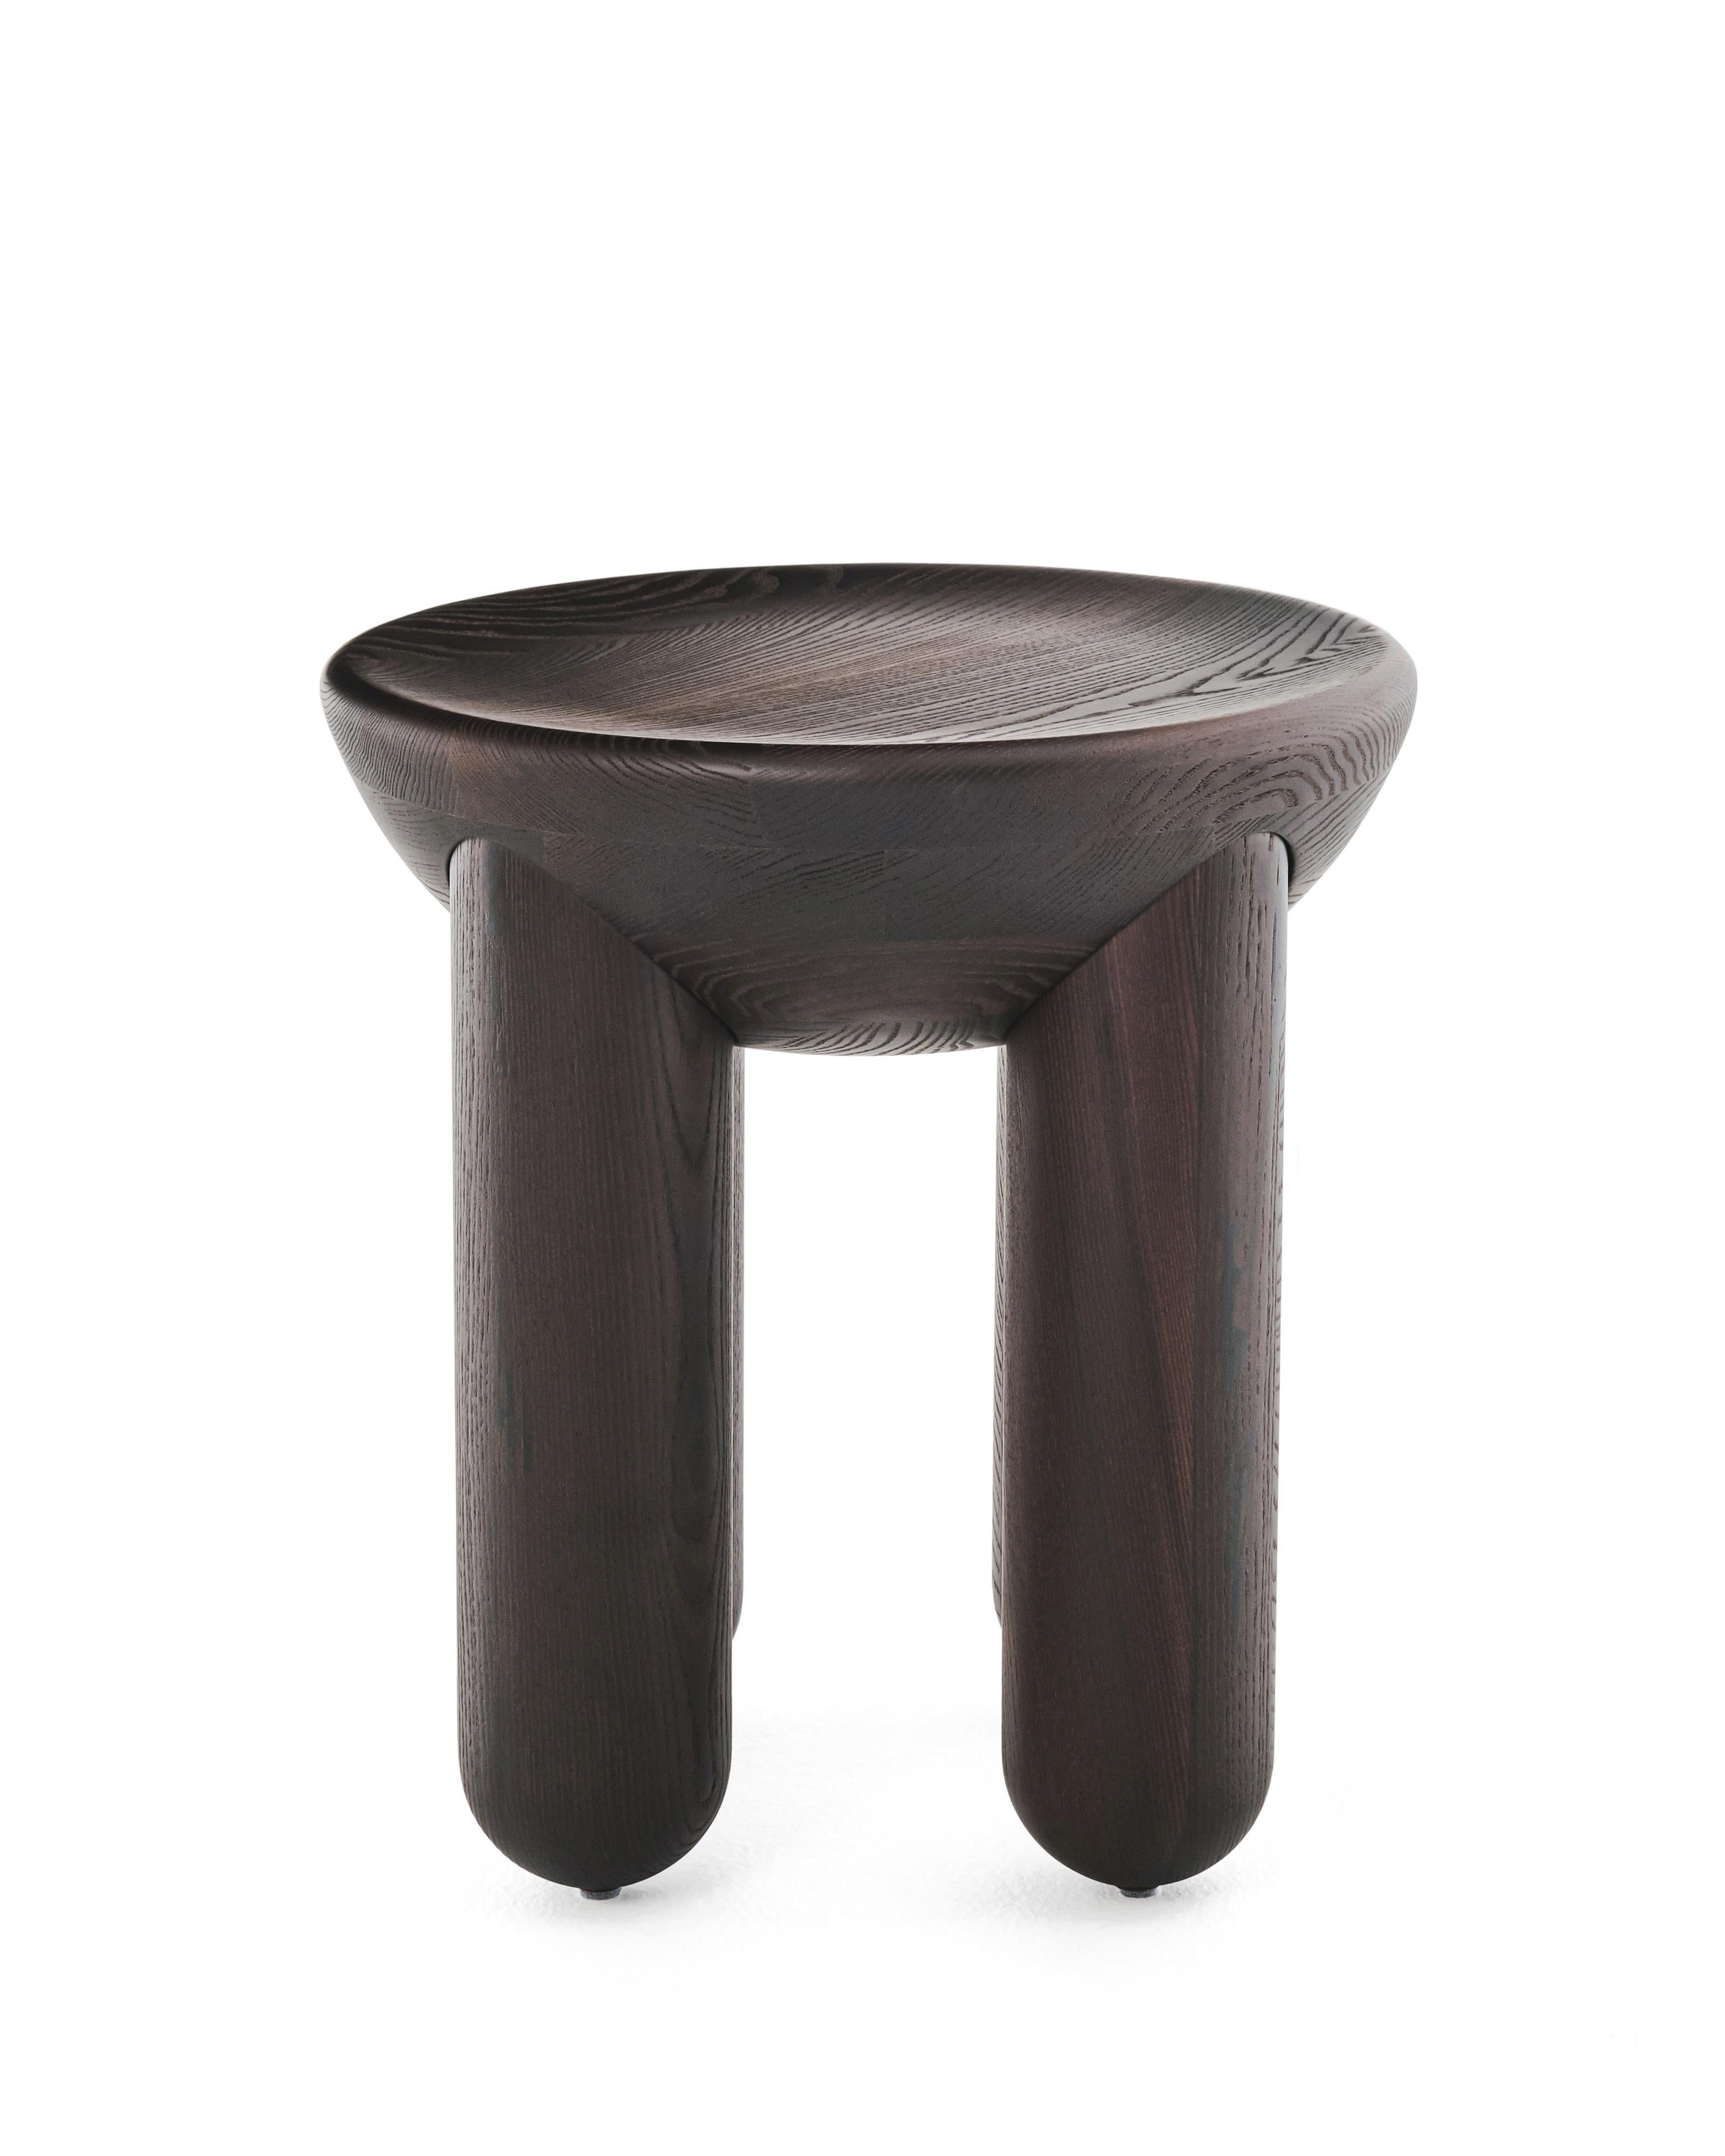 Ukrainian Contemporary Coffee or Side Table 'Freyja 3' by Noom, Thermo Ash For Sale